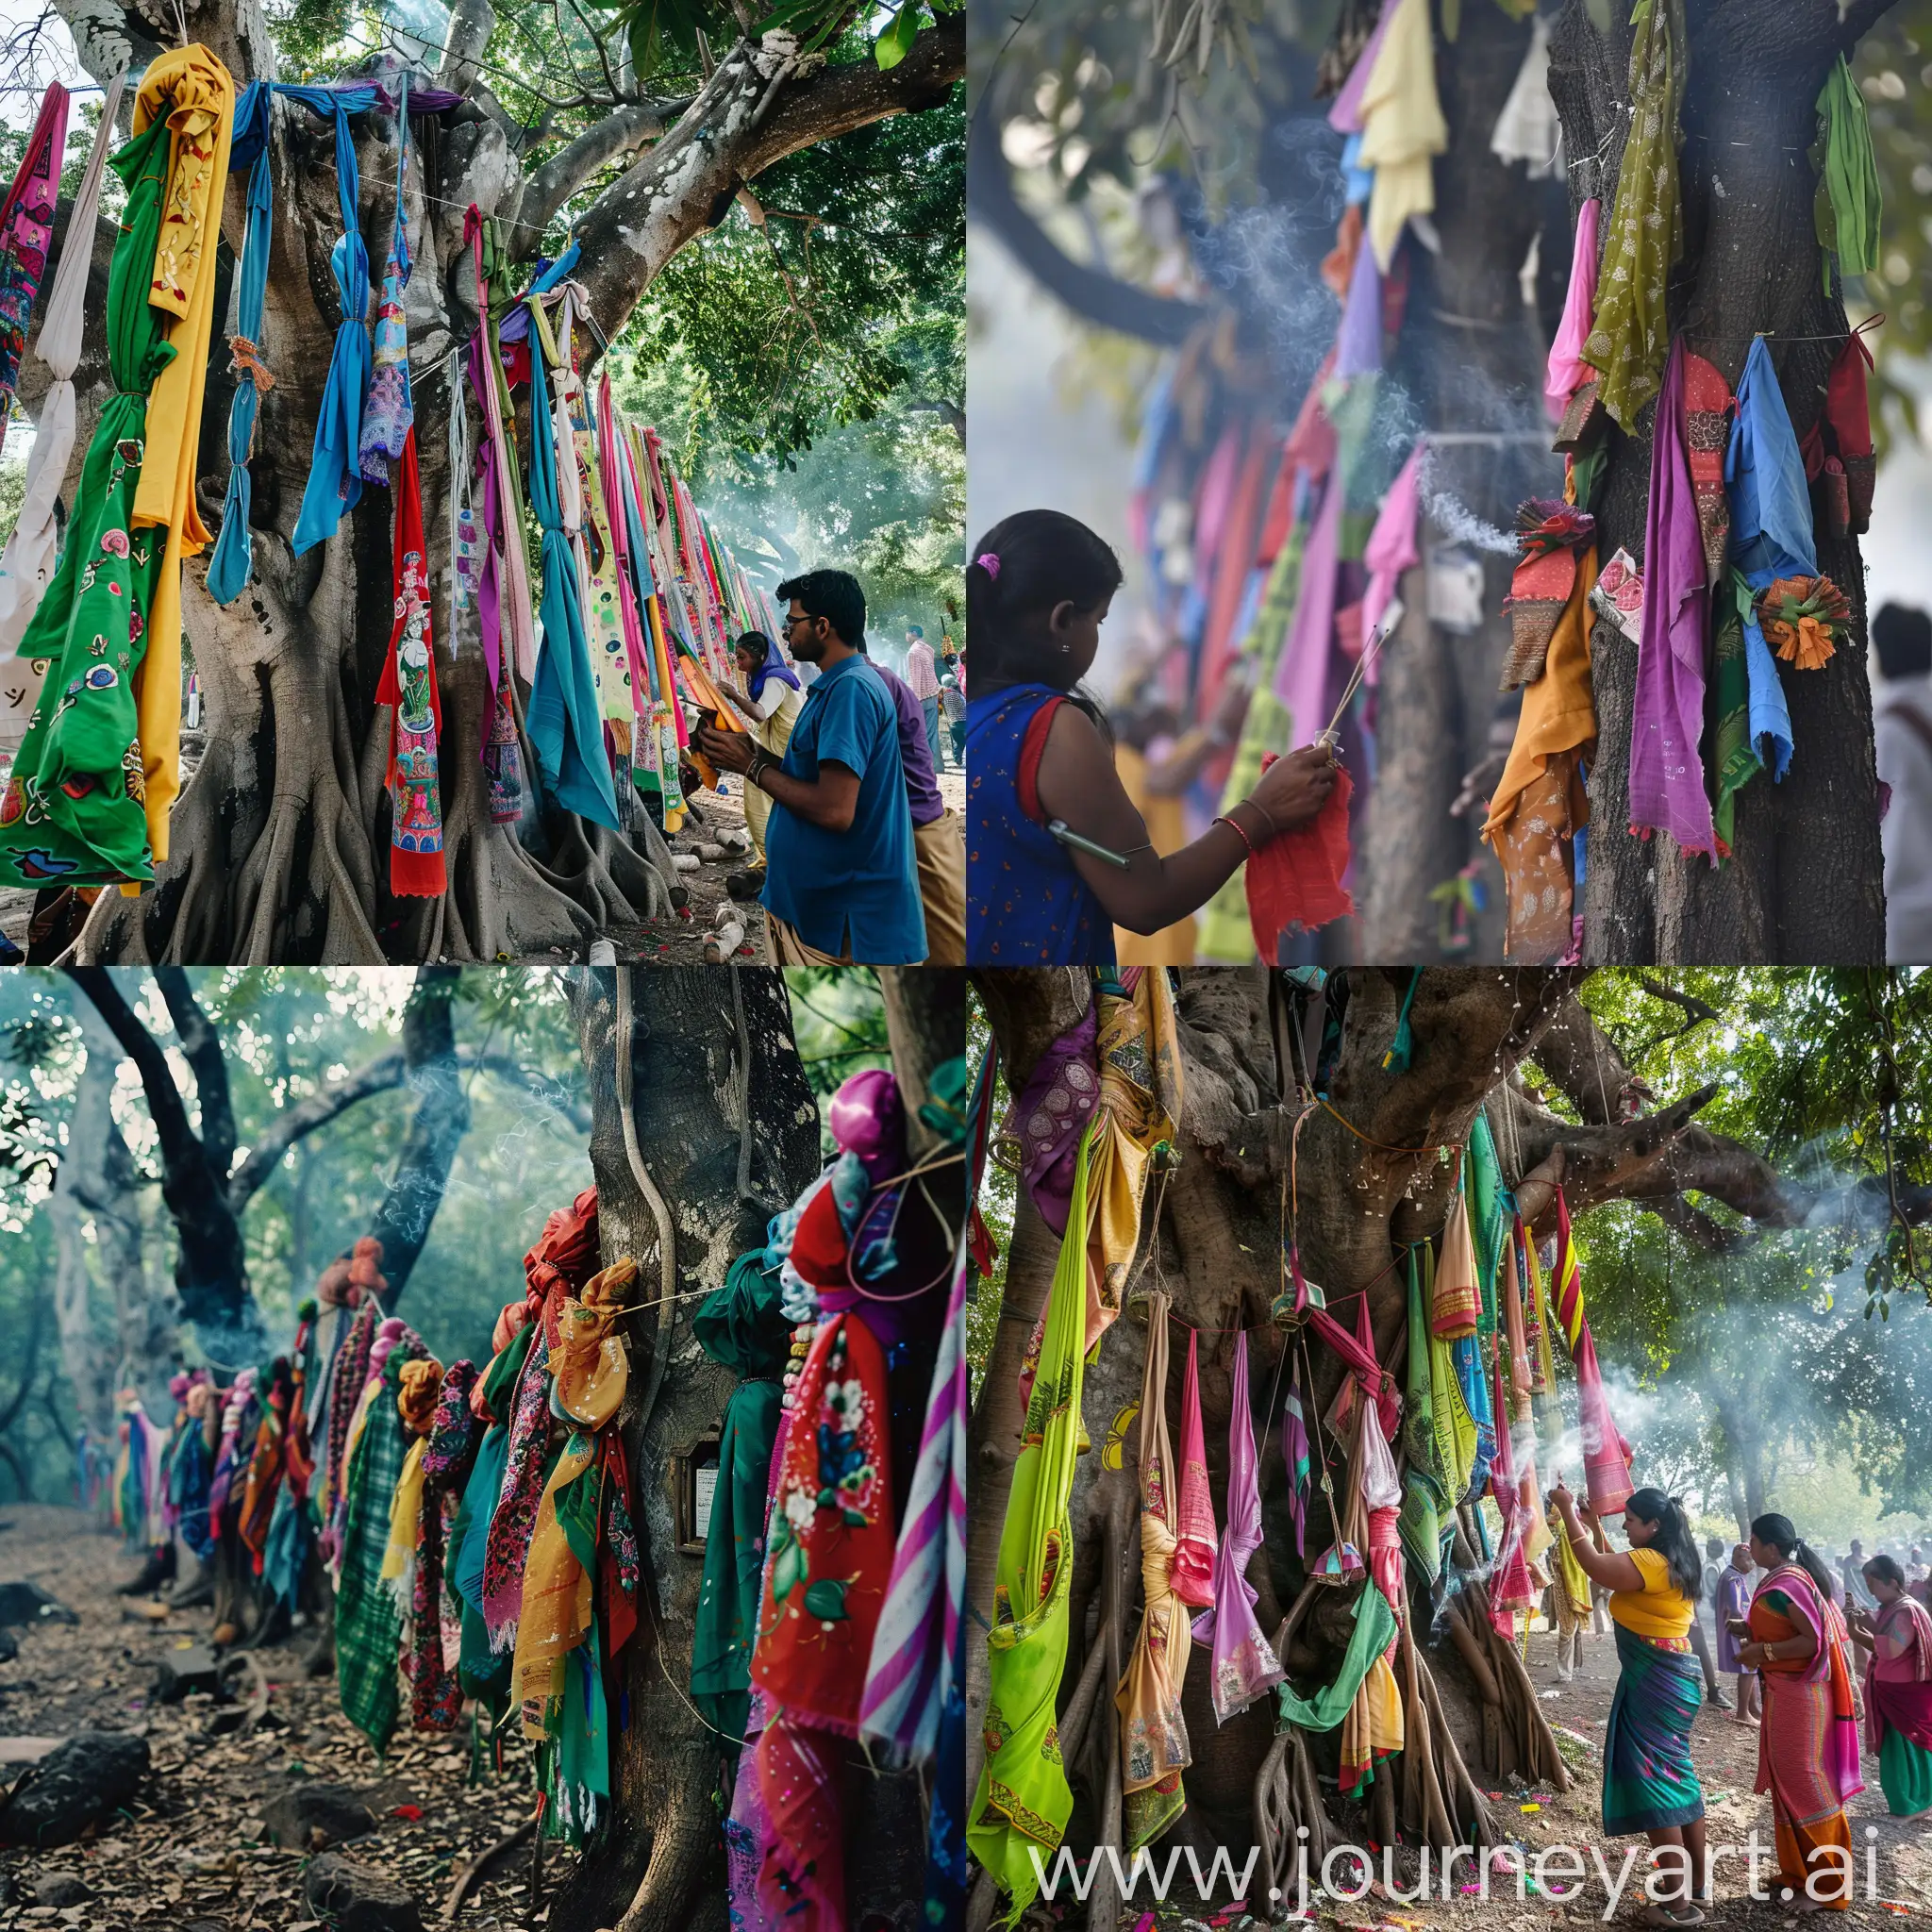 Traditional-Tree-Blessing-Ceremony-with-Colorful-Cloth-Offerings